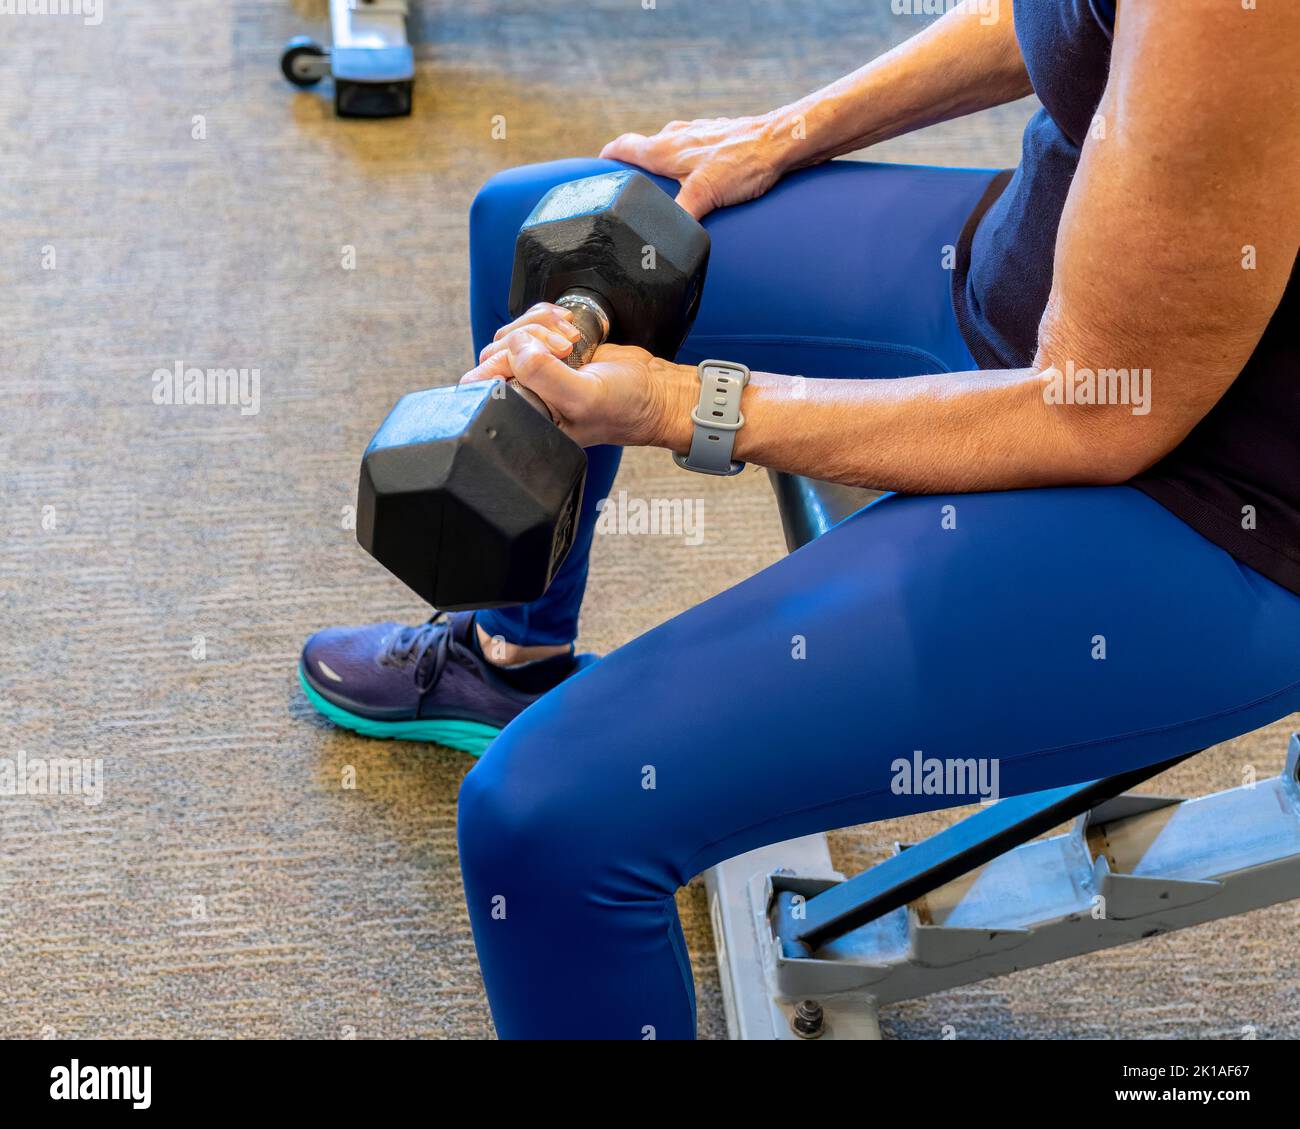 Middle aged mature or senior woman lifting weights or using weights or dumbbells in a gym for exercise, fitness and weight training. Stock Photo